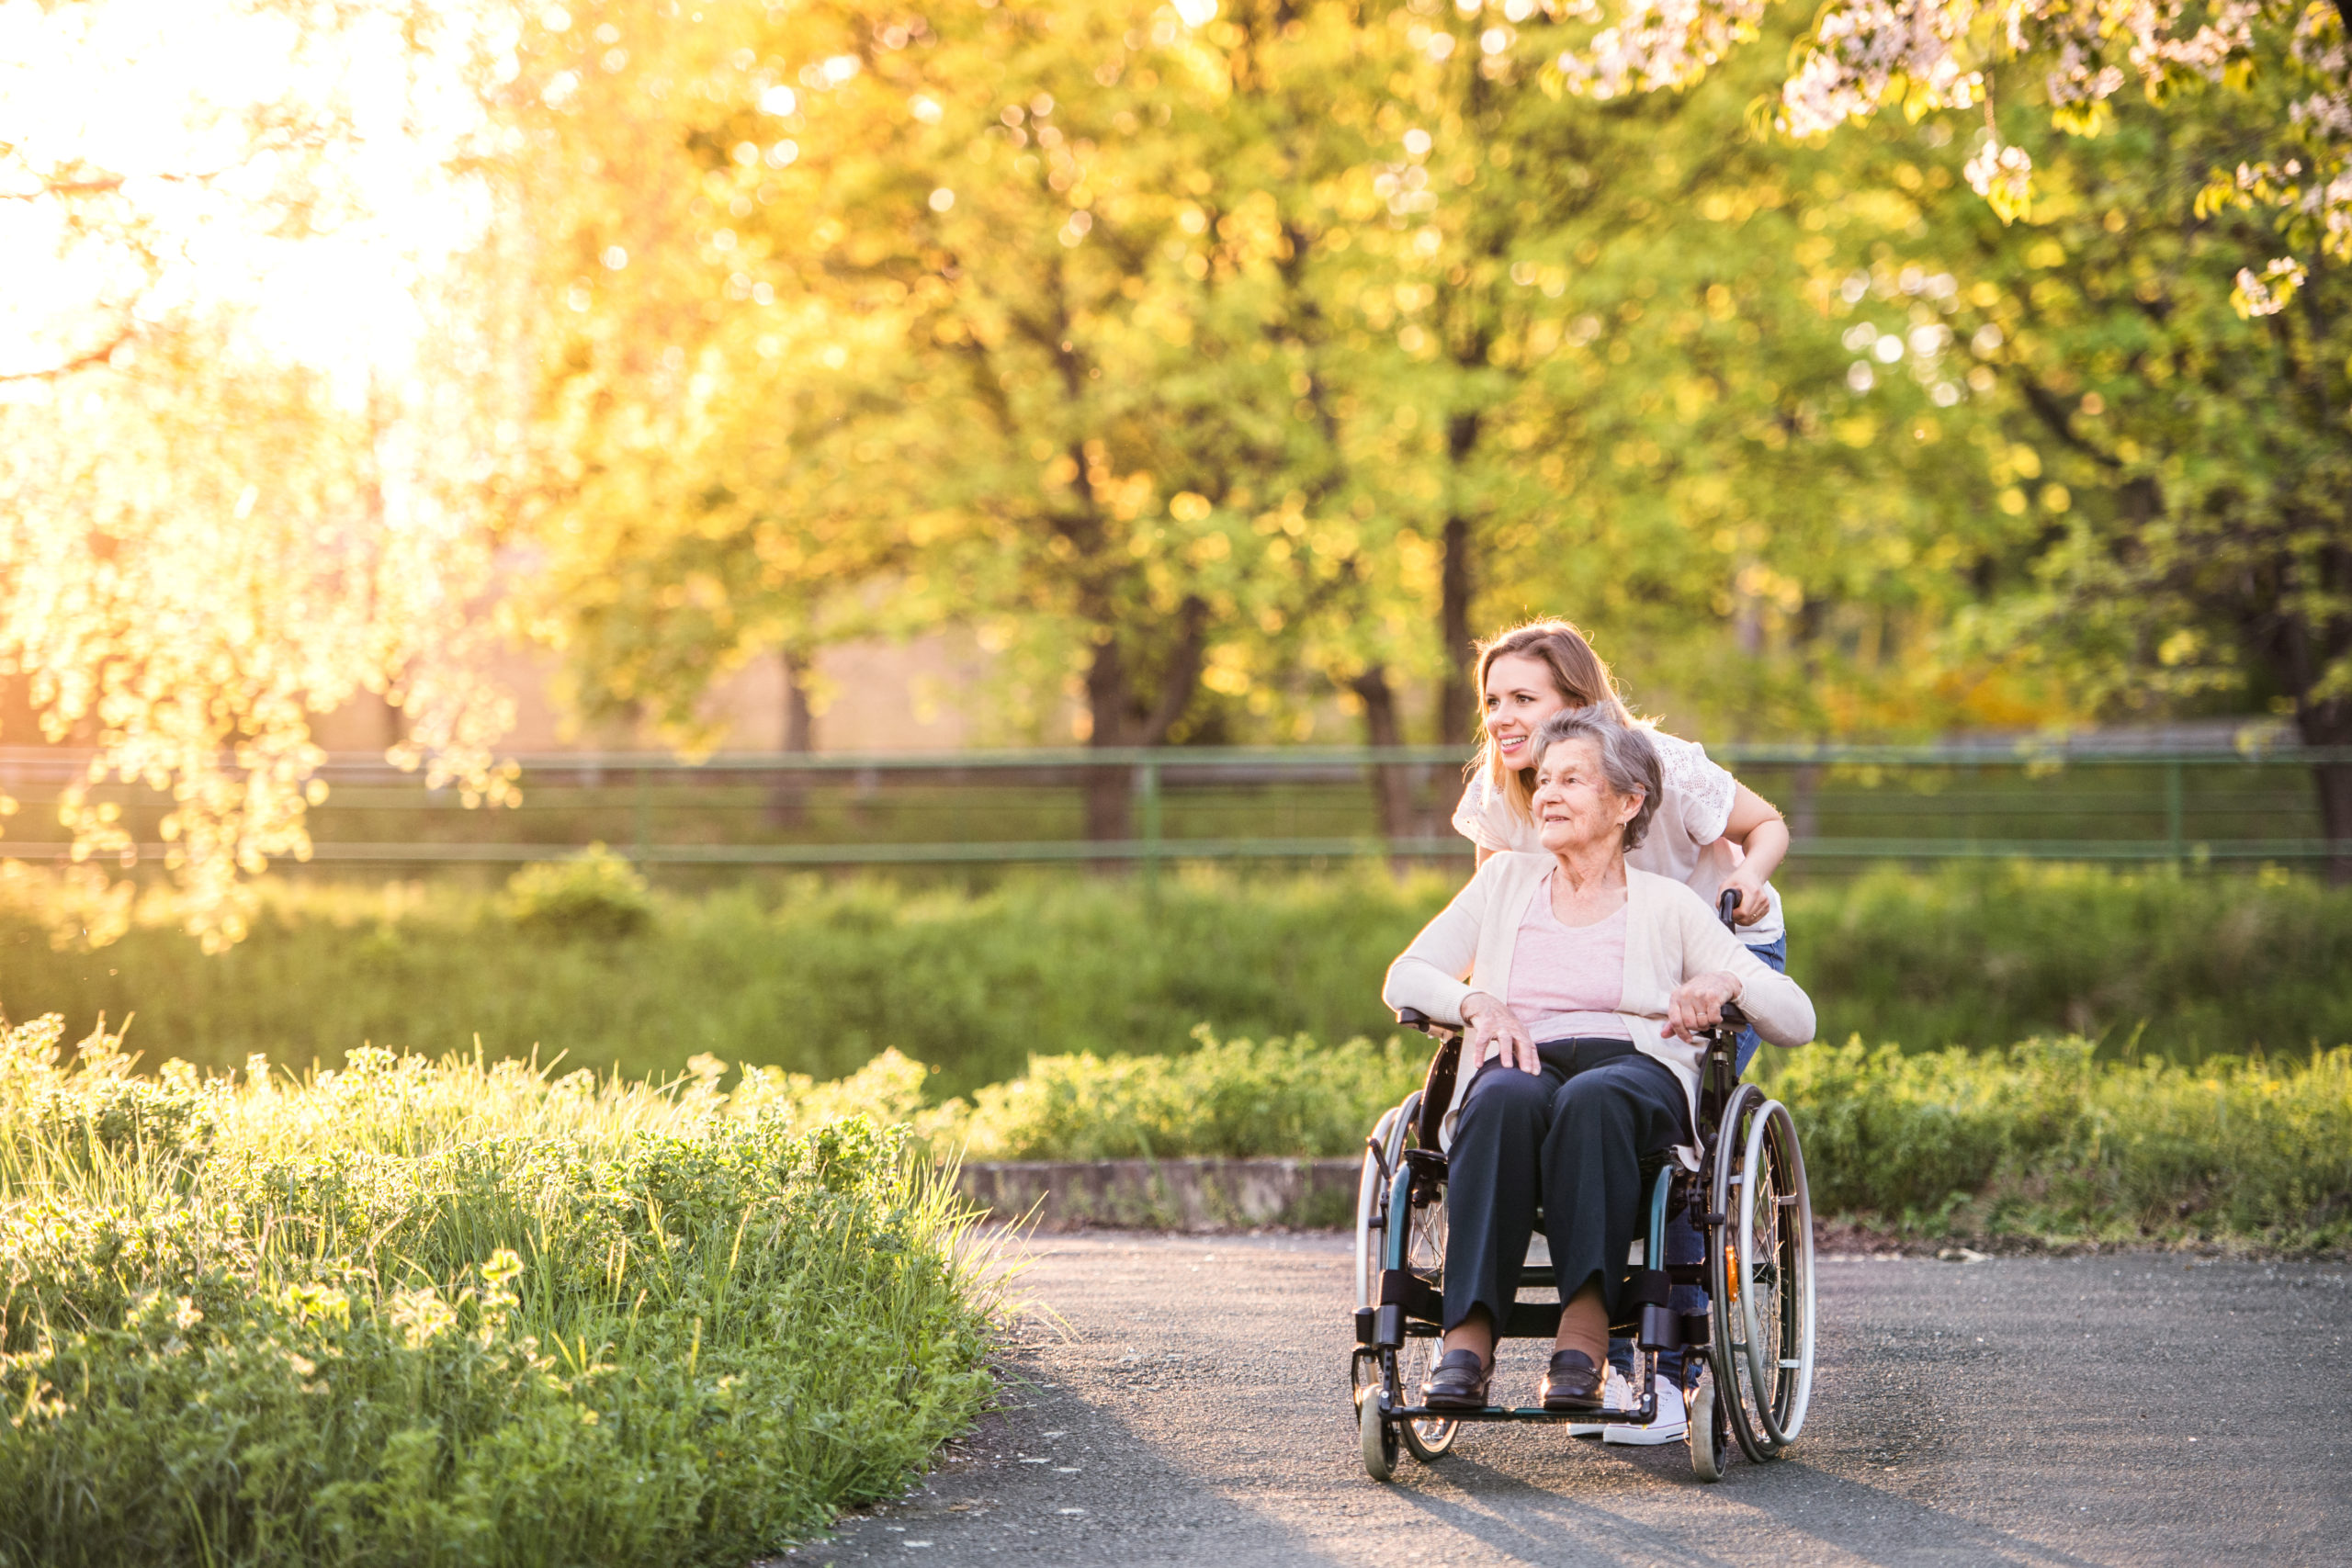 Woman pushing her mother in a wheelchair along an outdoor path.